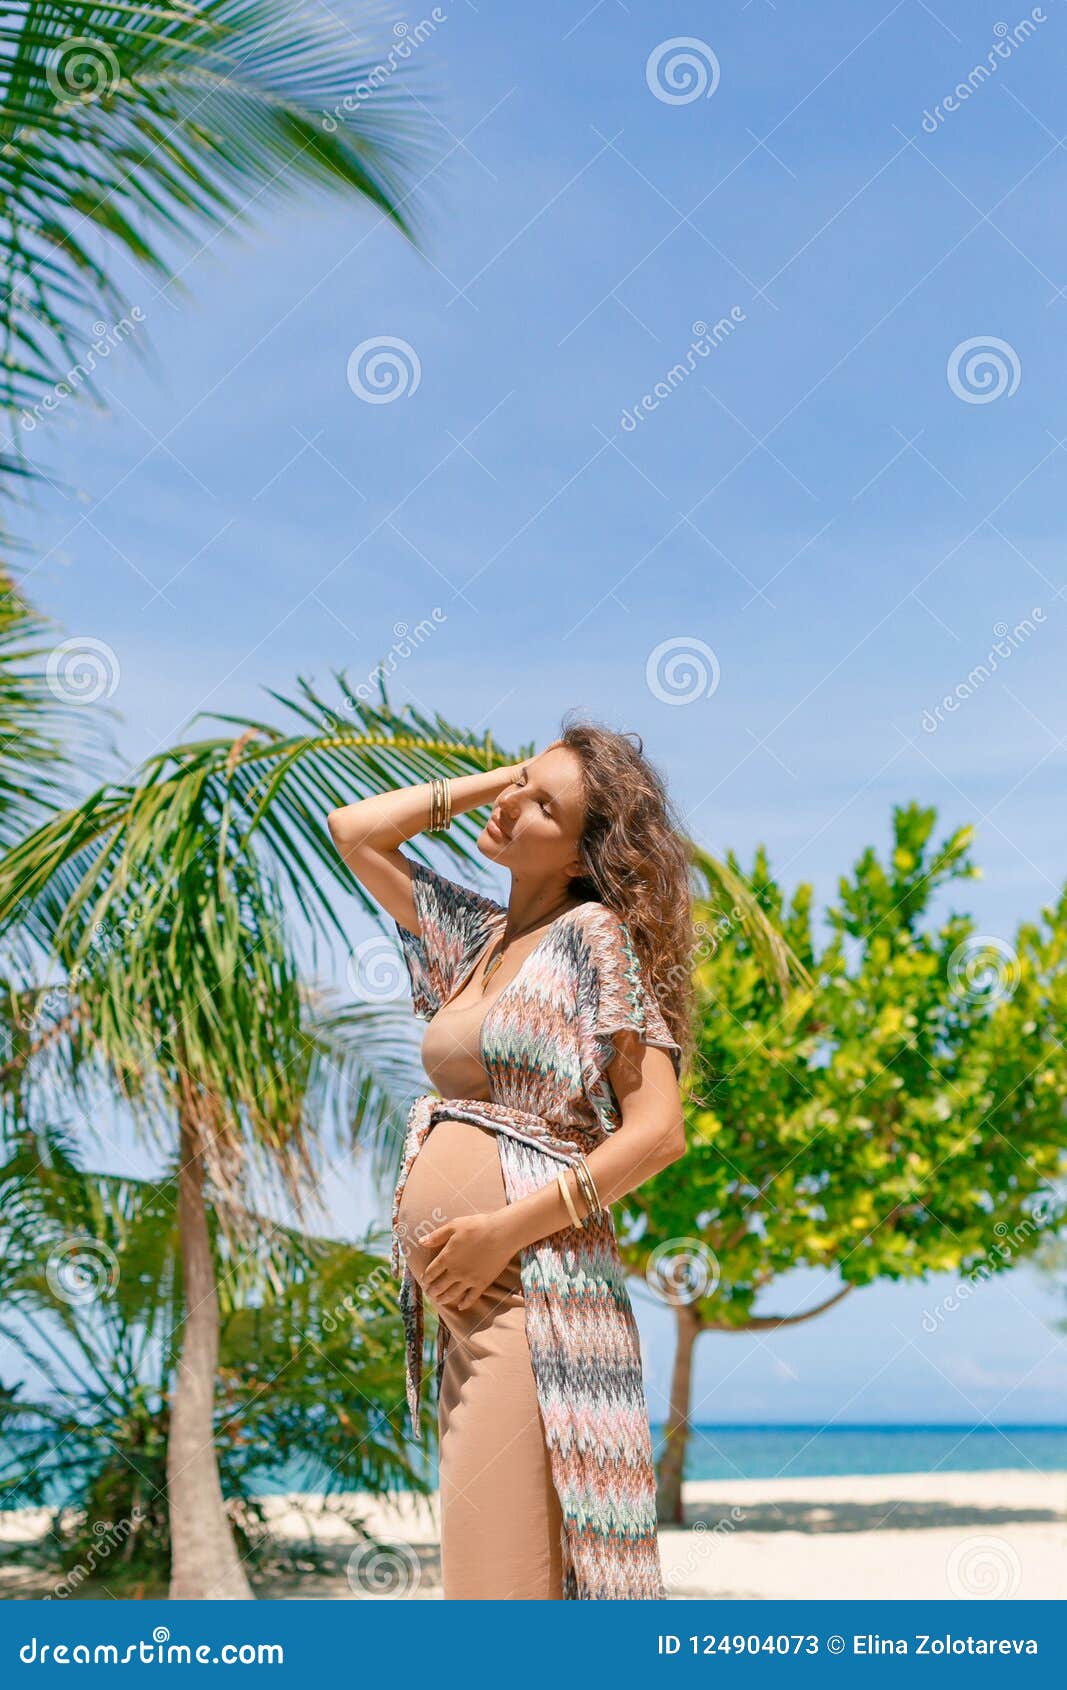 tropical places to visit while pregnant